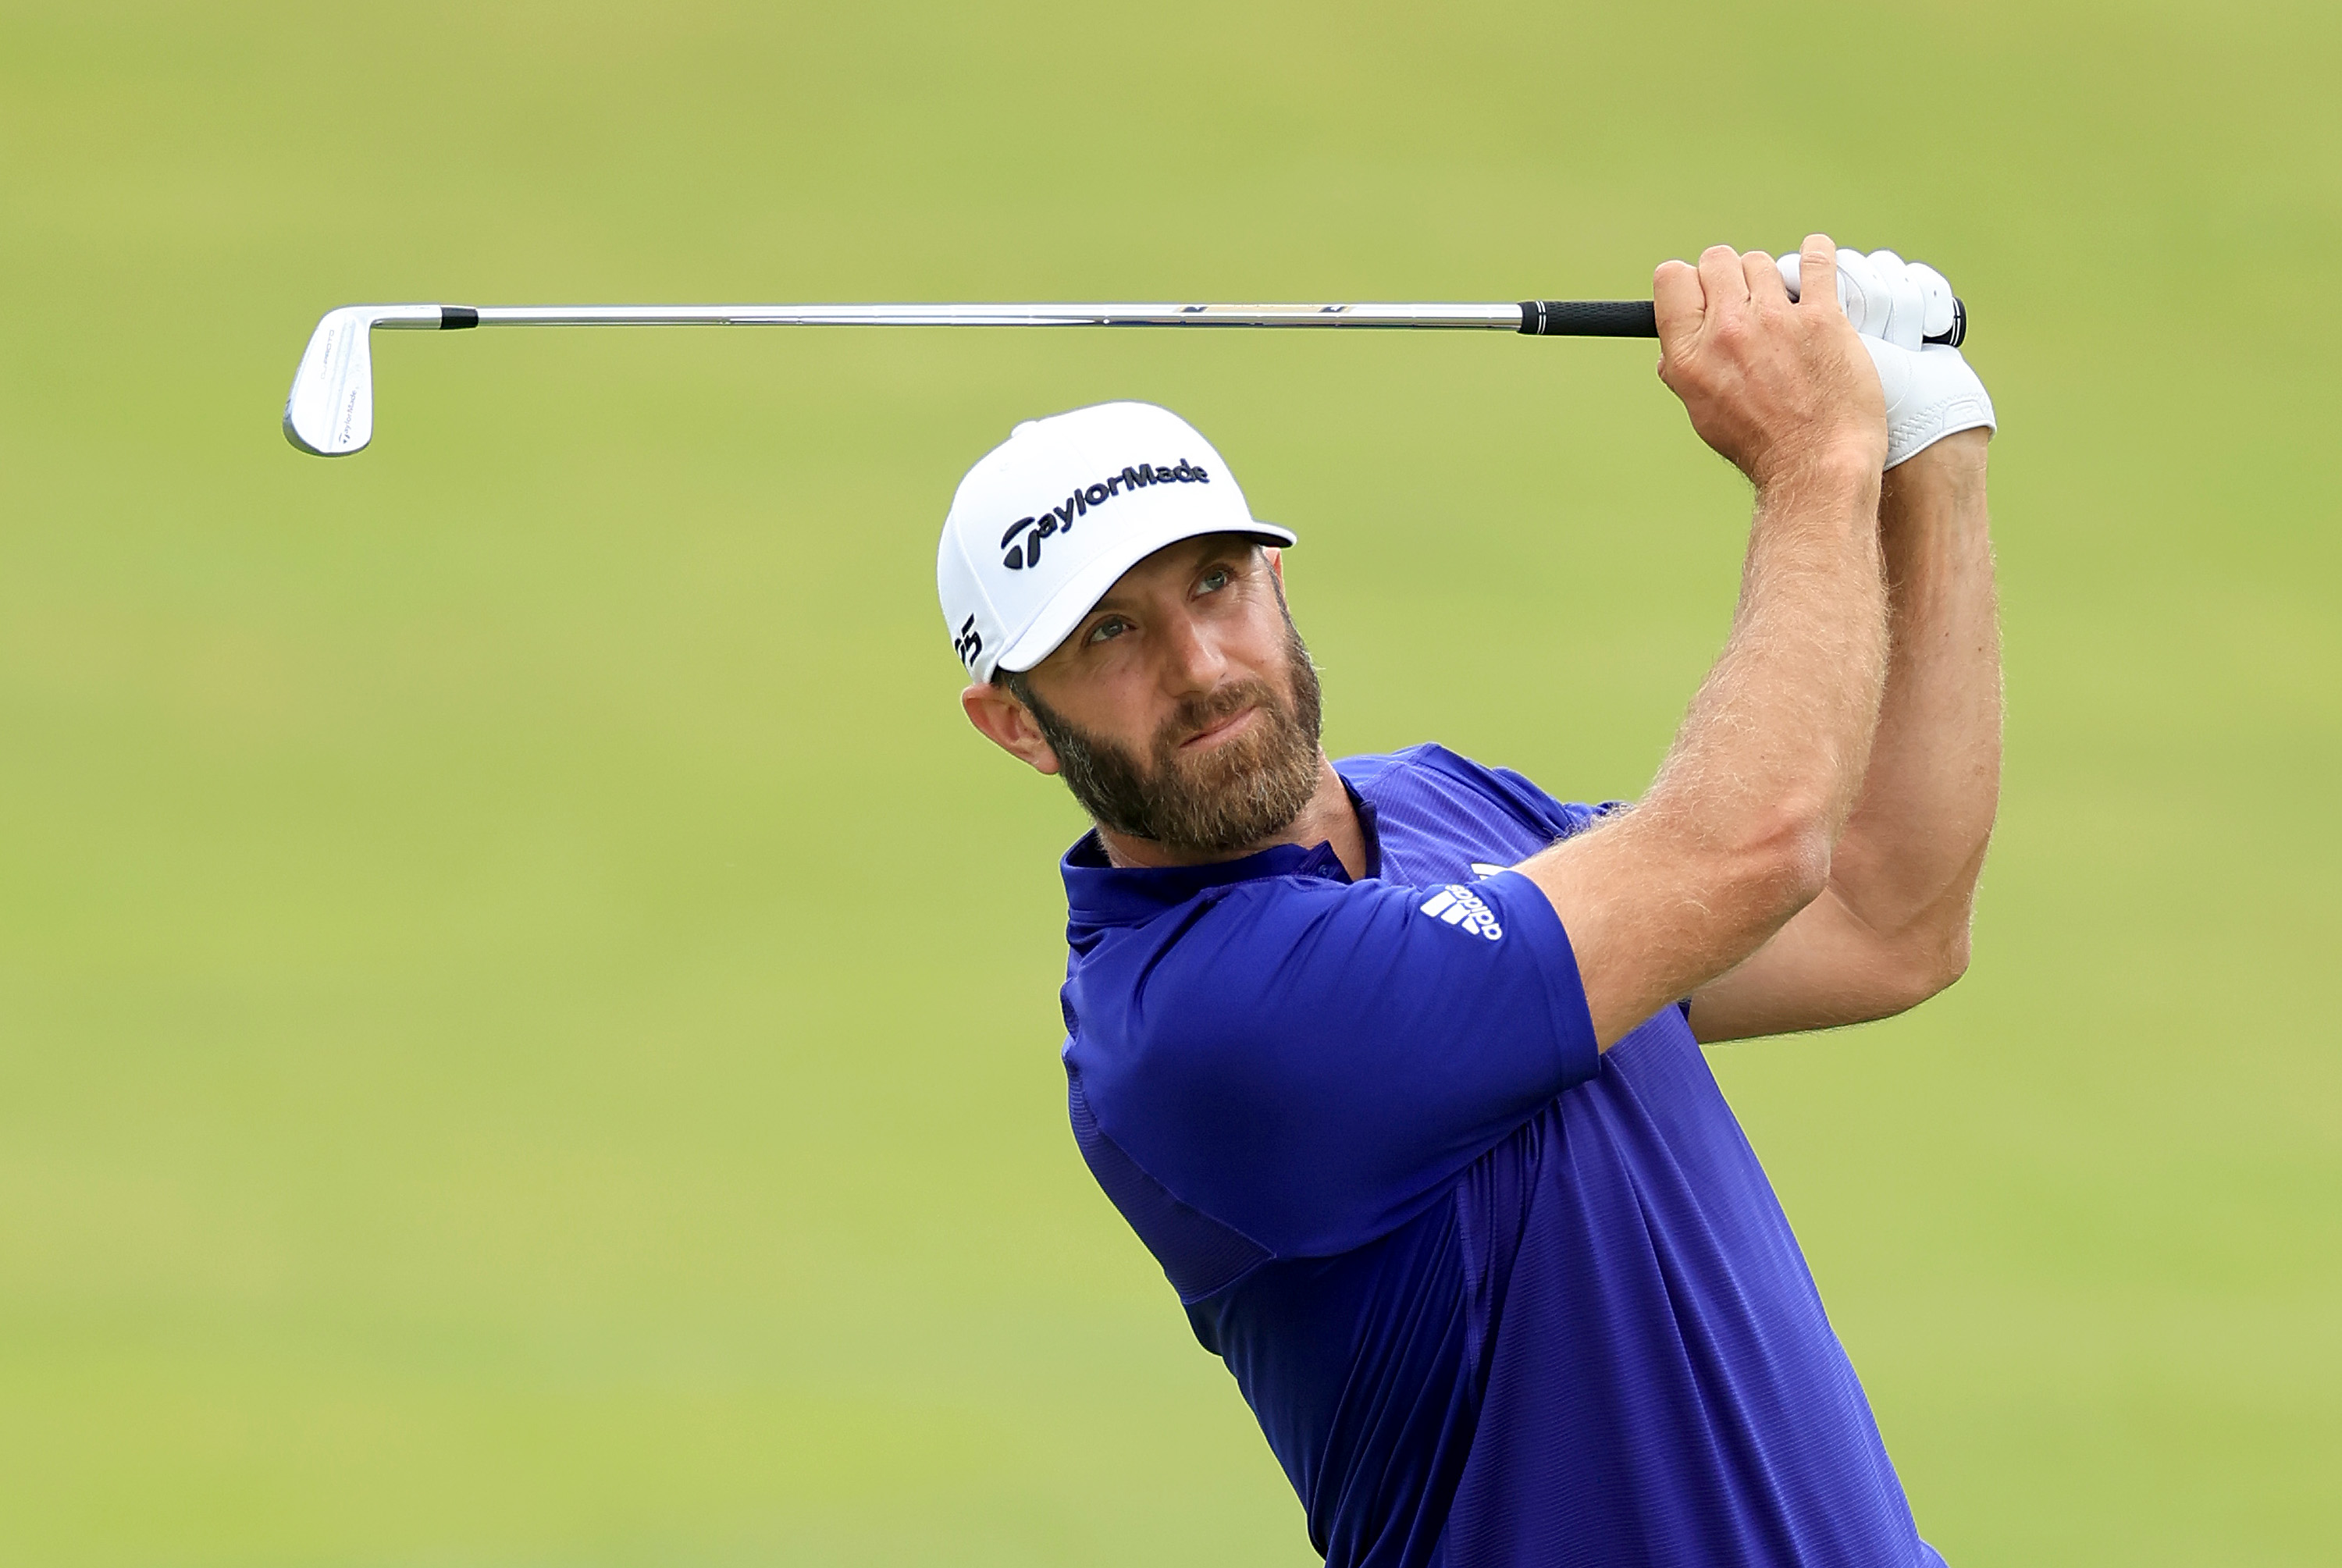 Dustin Johnson of The United States plays his second shot on the eighth hole during the first round of the 2022 U.S.Open Championship at The Country Club on June 16, 2022 in Brookline, Massachusetts.